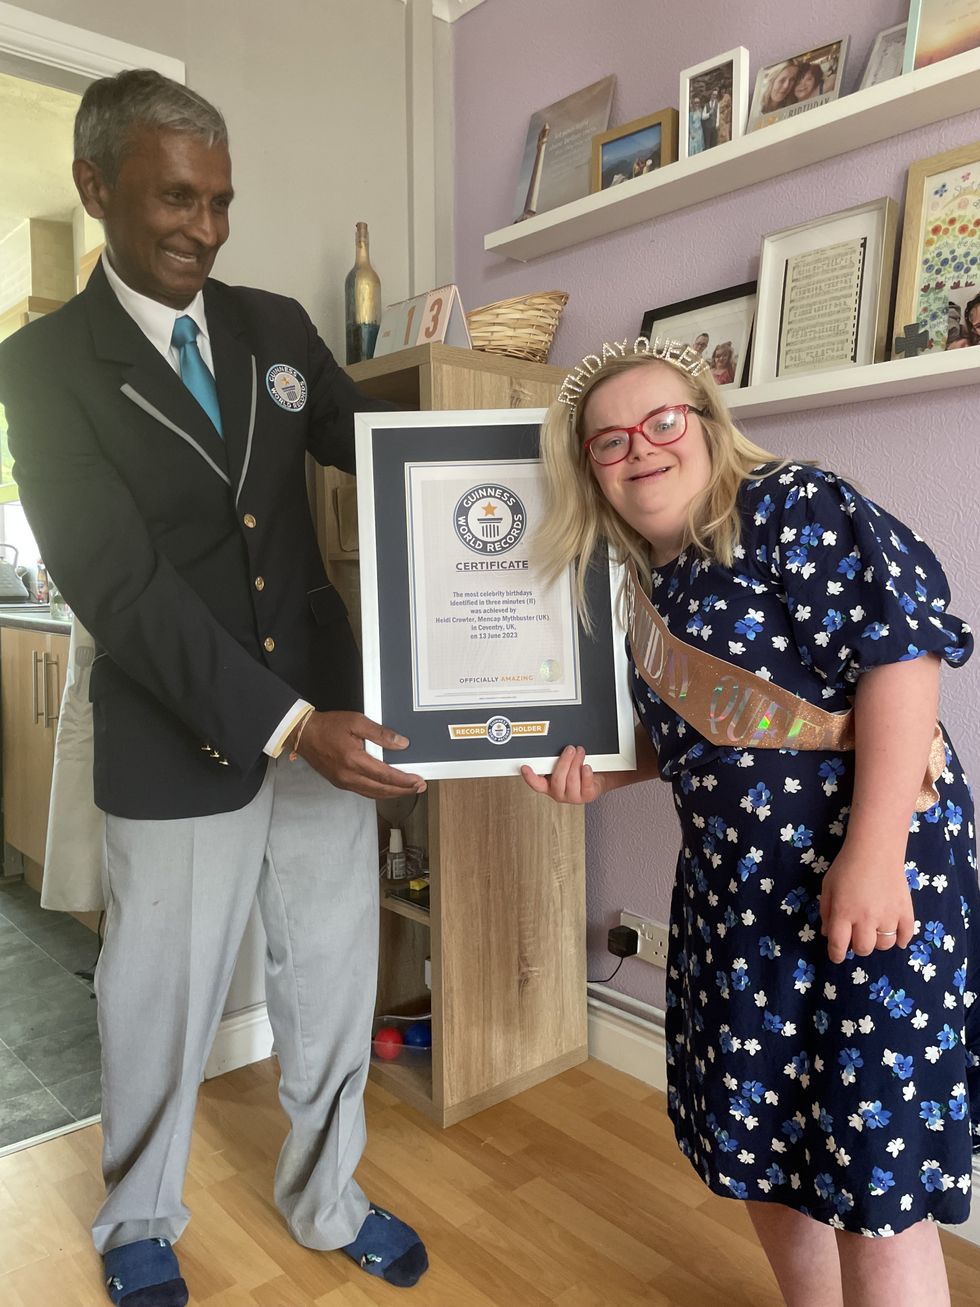 Woman with Down’s syndrome ‘very proud’ after achieving world record